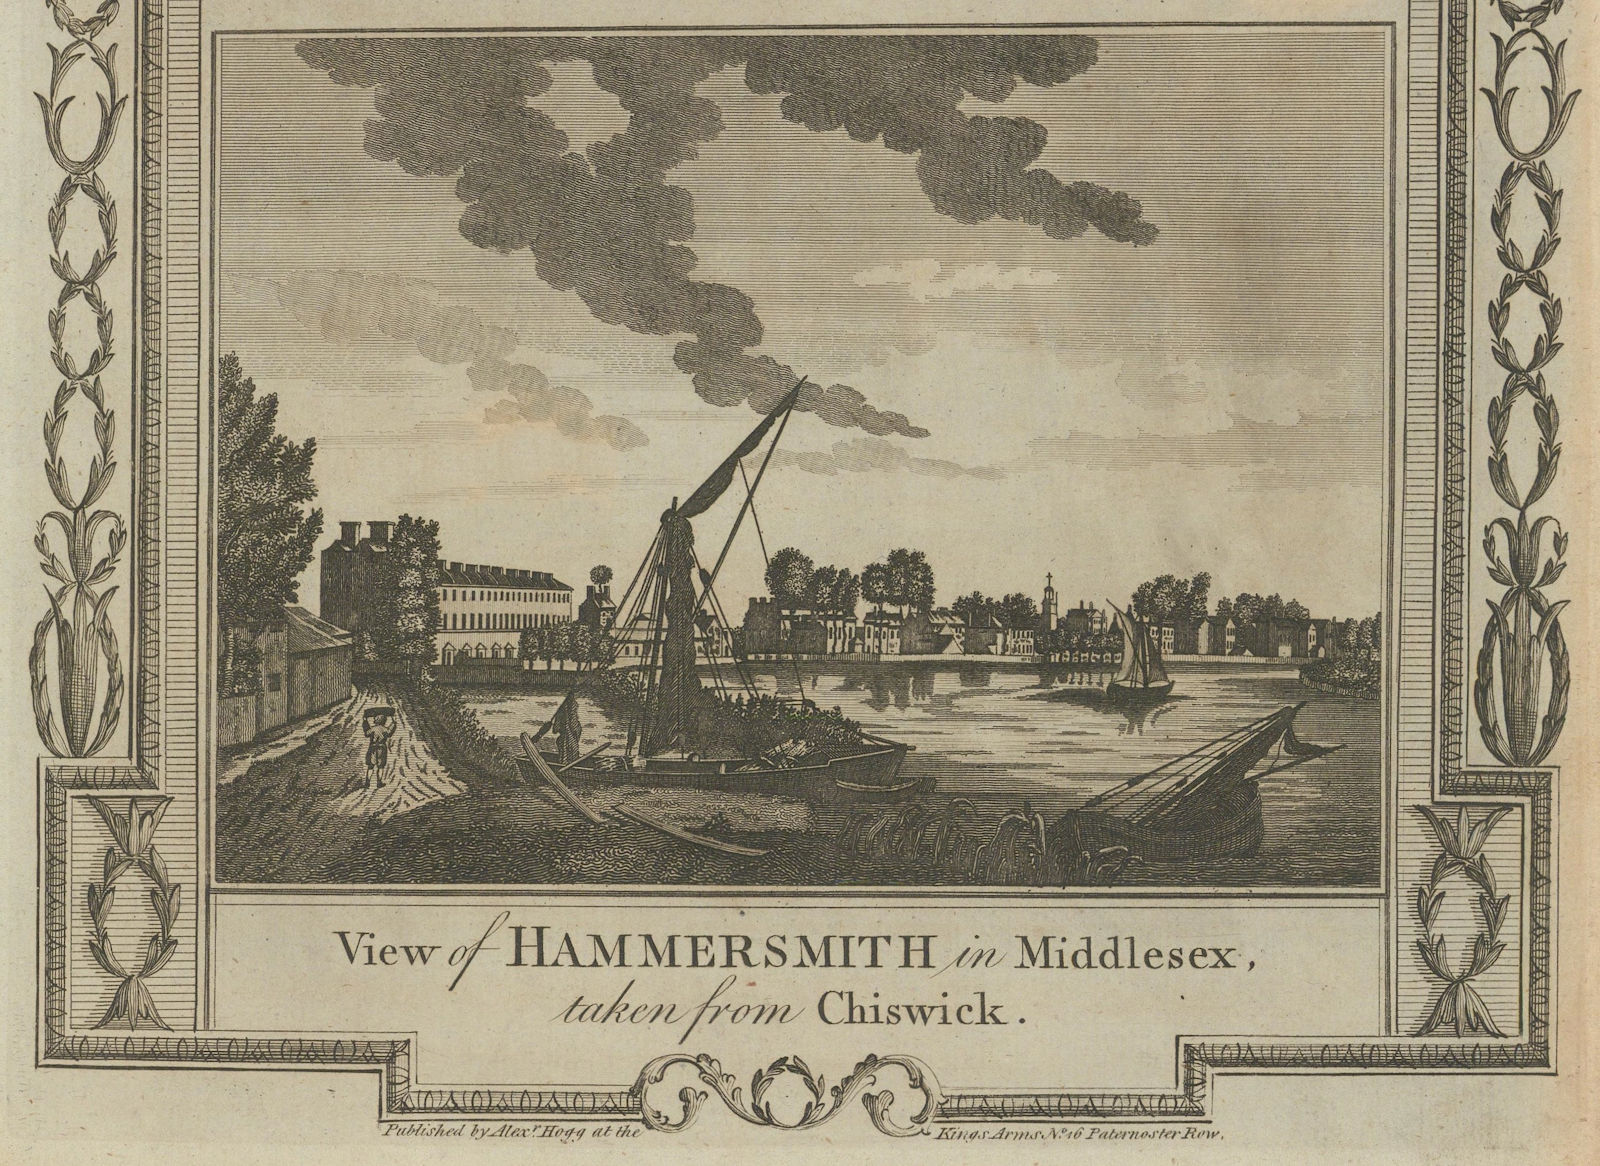 Associate Product A view of Hammersmith from Chiswick, London. THORNTON 1784 old antique print